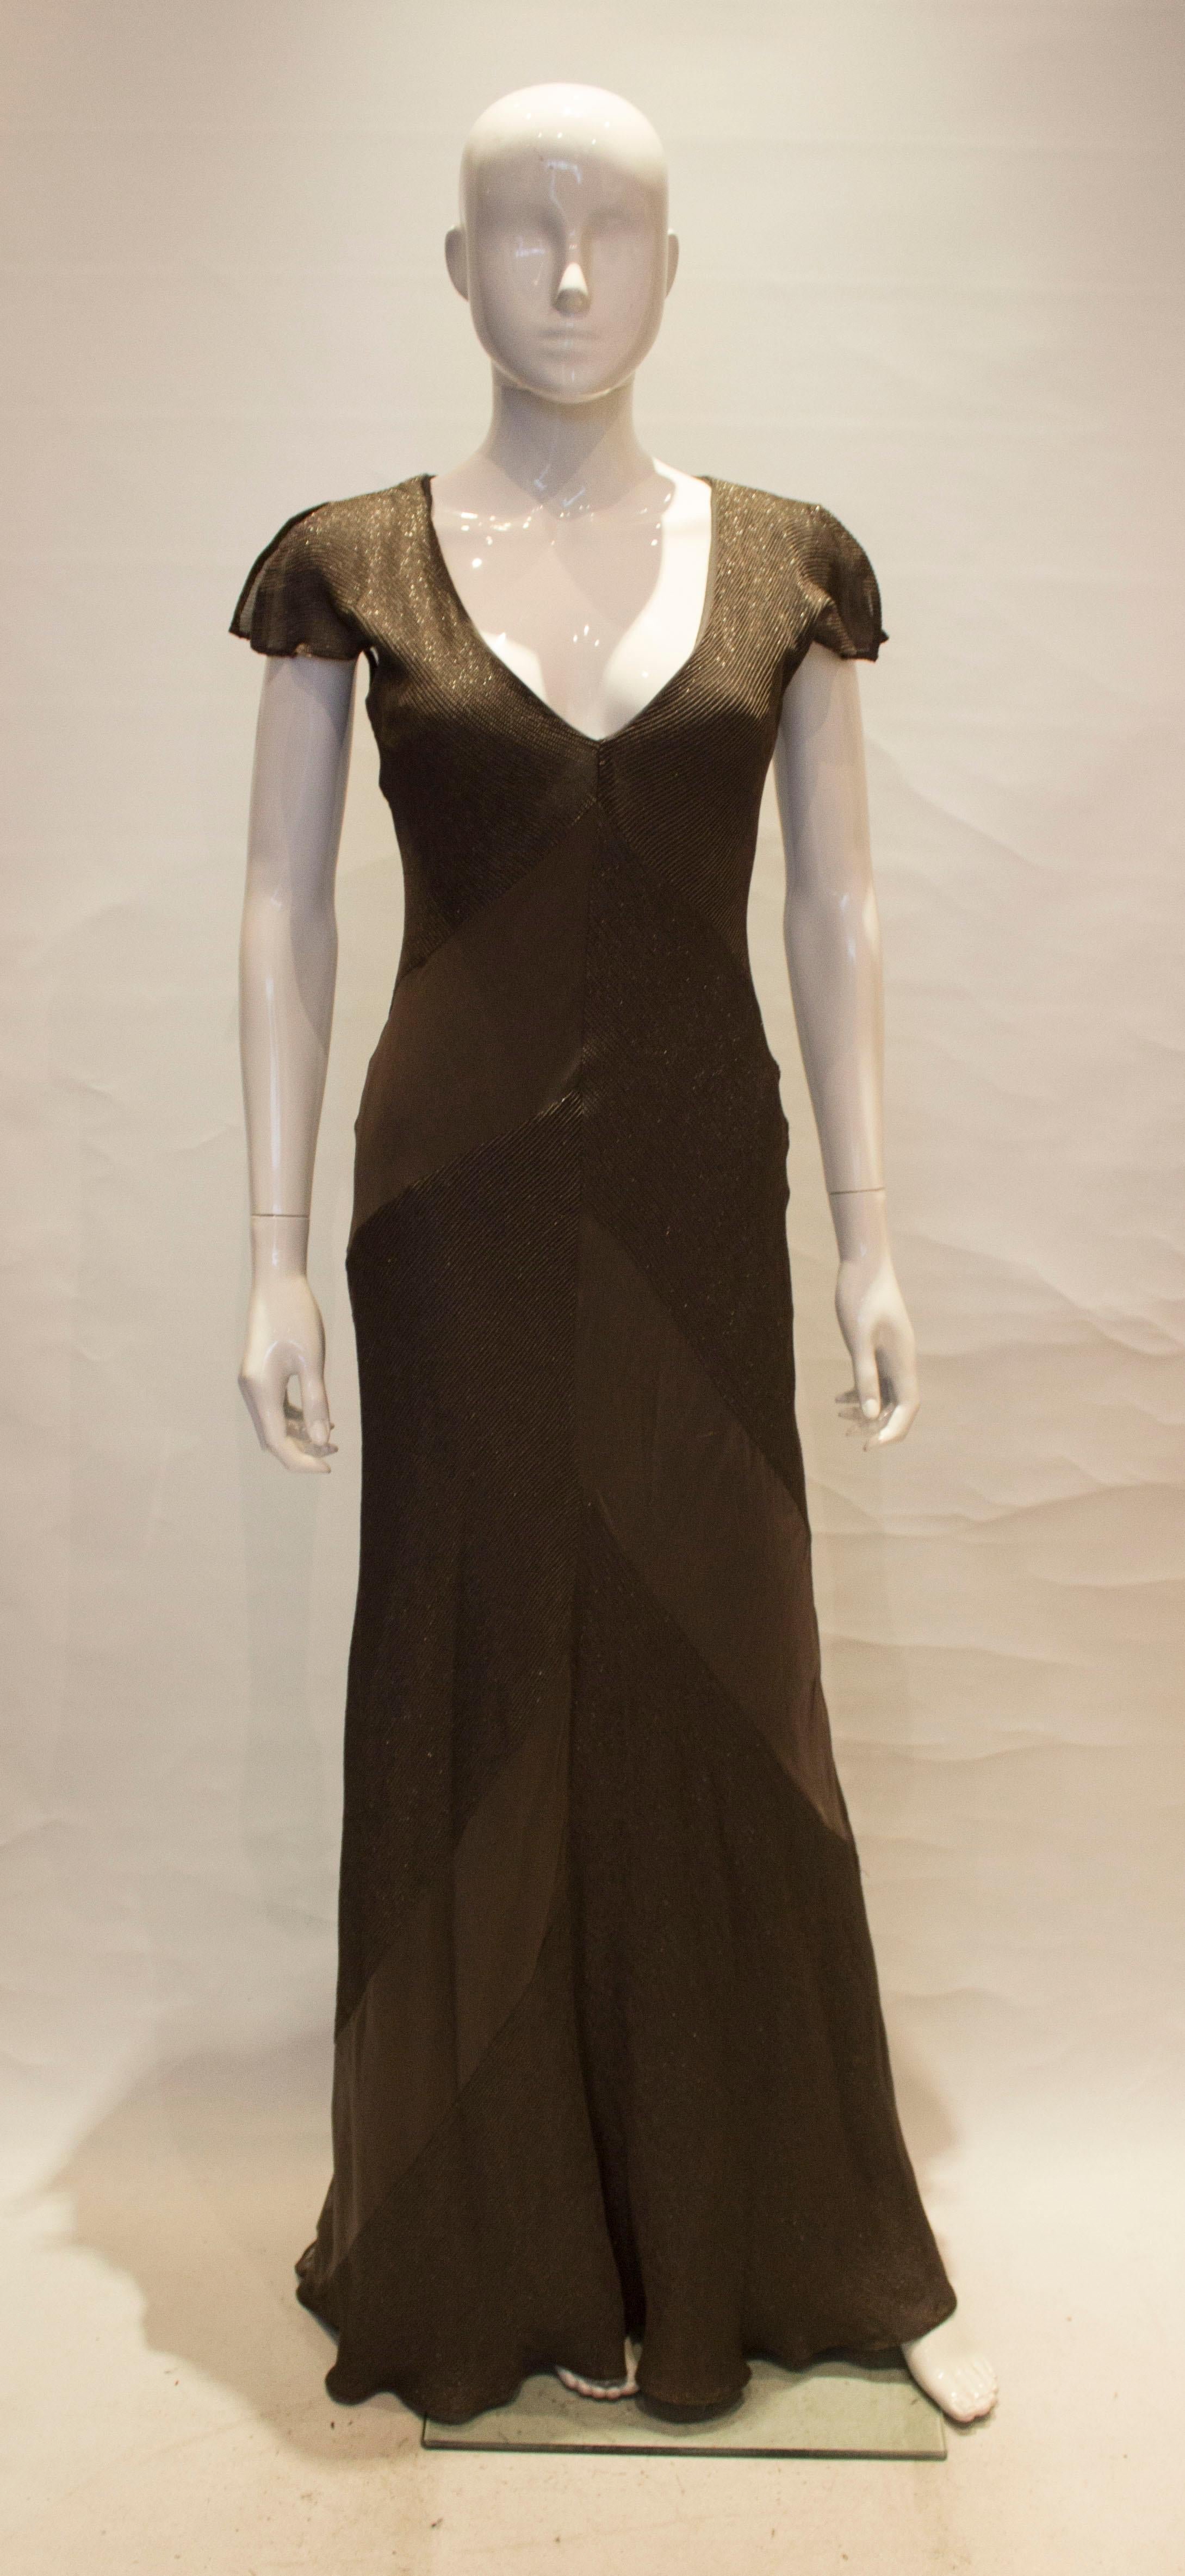 A head turning and easy to wear gown by Amanda Wakeley. The dress has a v neckline, and cap sleaves. It is fully lined and covered in sections of bead work.